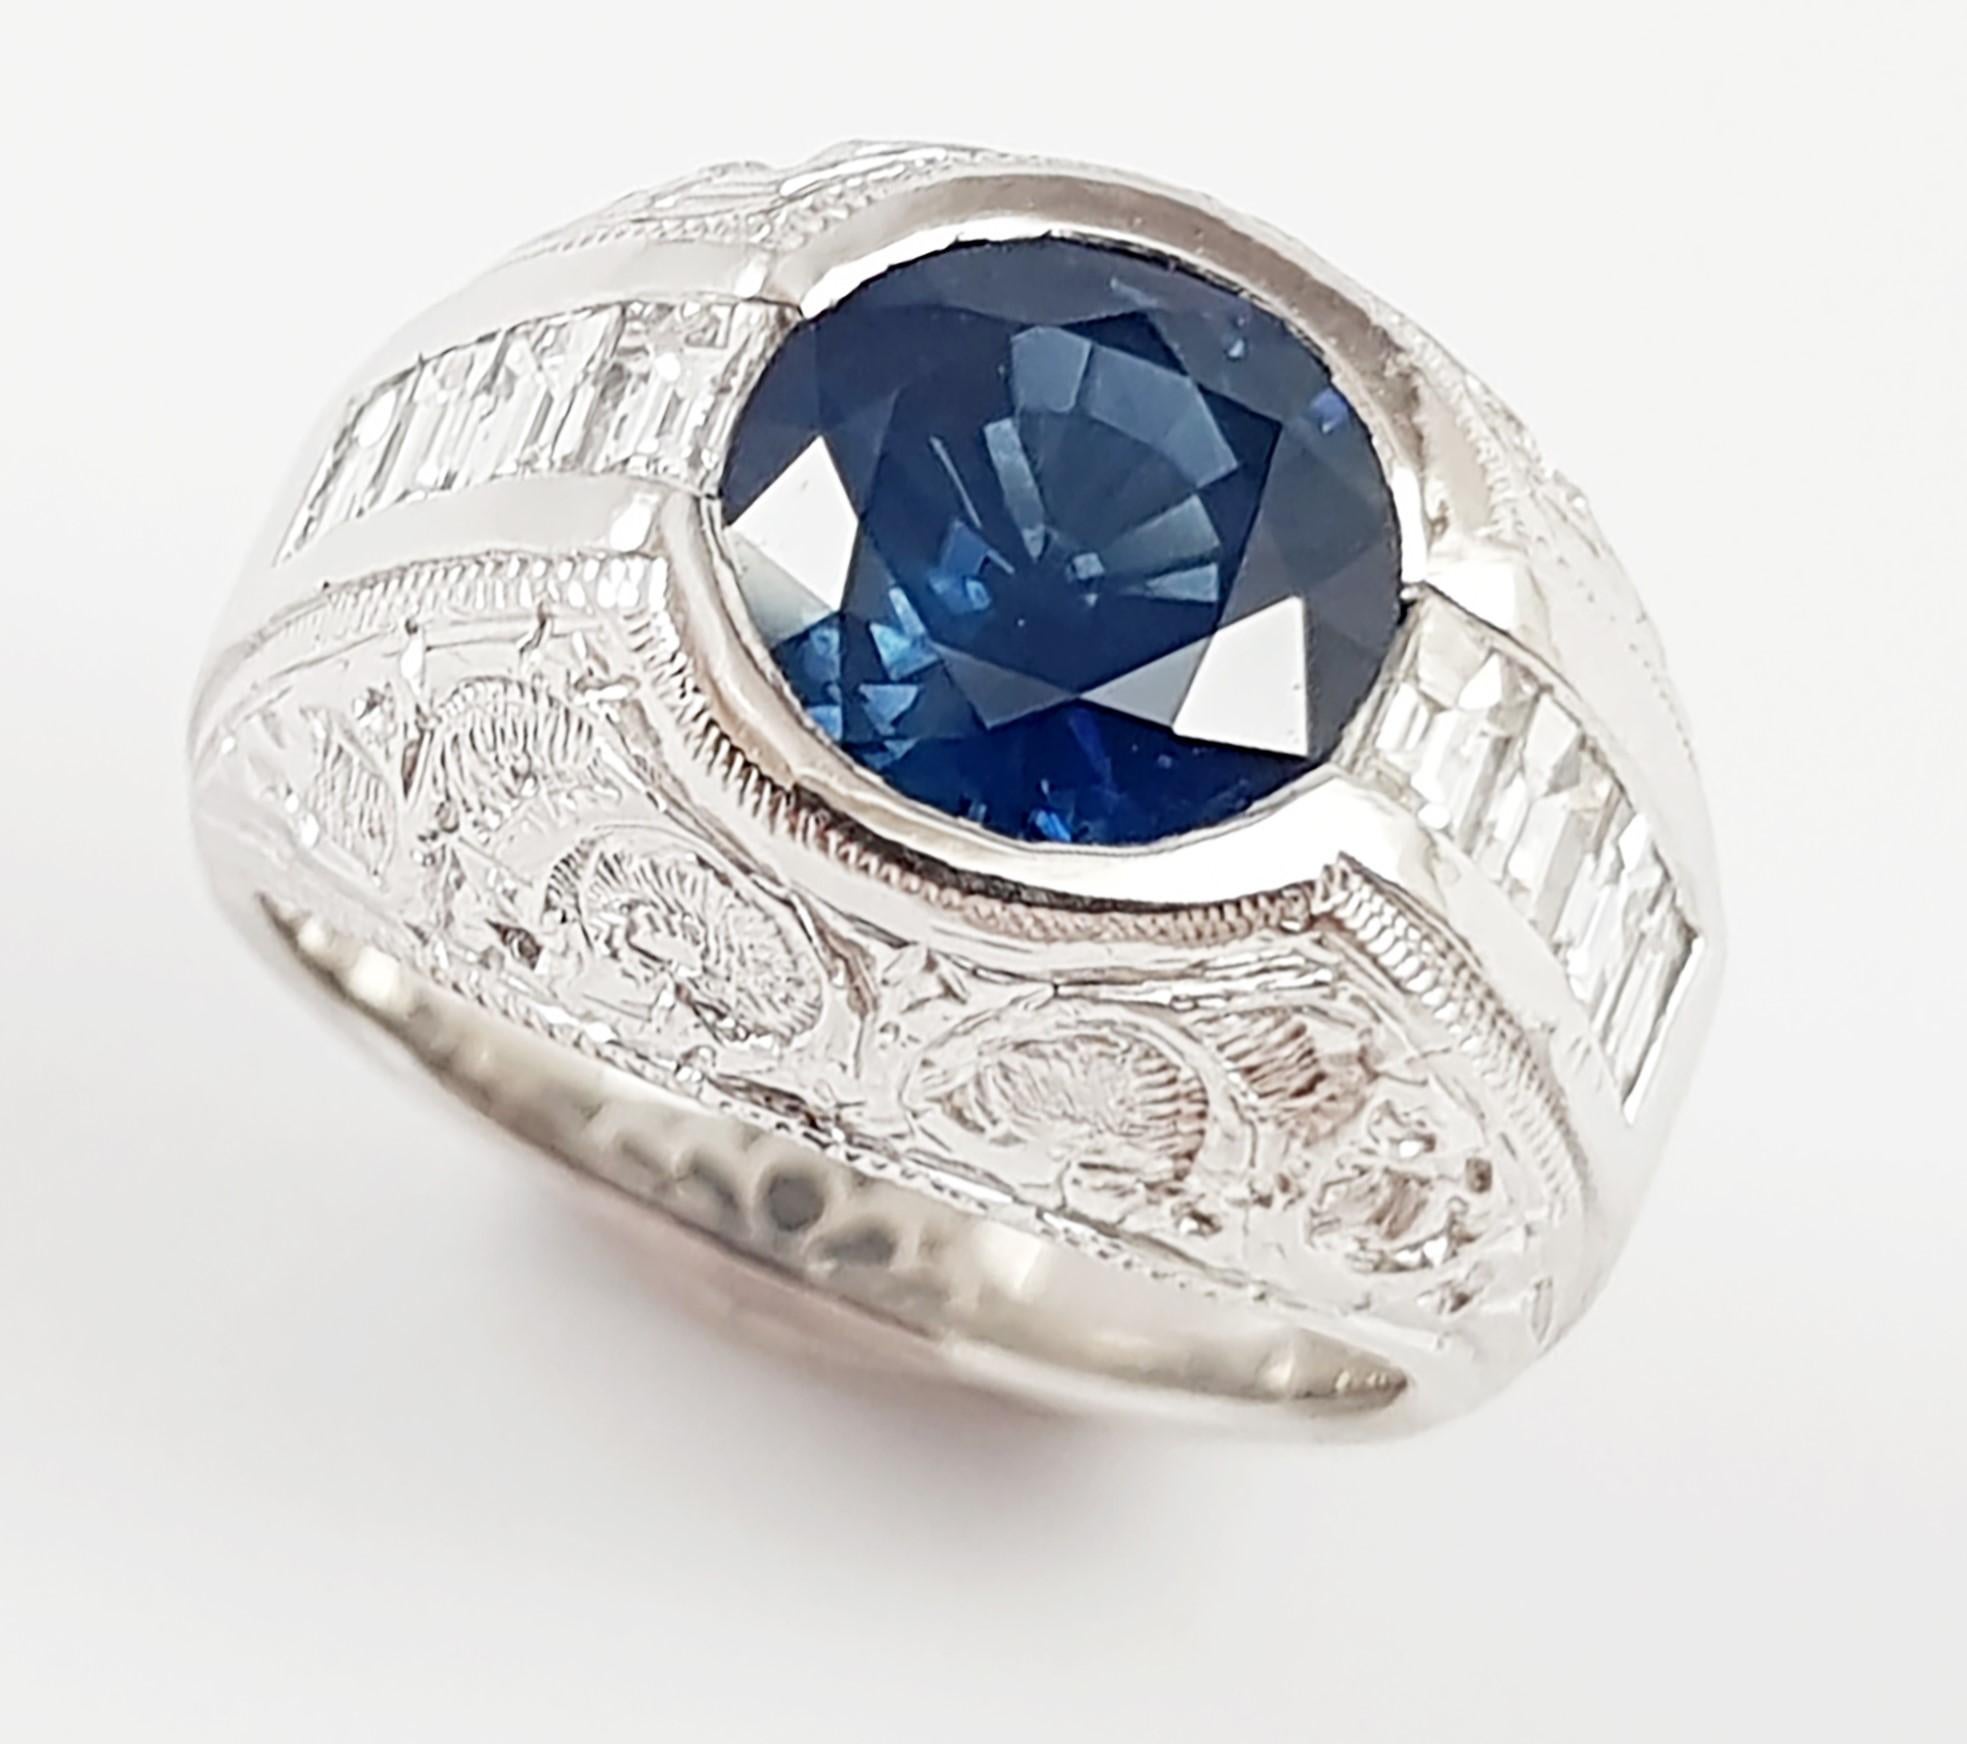 Blue Sapphire 2.72 carats with Diamond 0.60 carat Ring set in Platinum 950 Settings

Width:  0.9 cm 
Length: 0.9 cm
Ring Size: 49
Total Weight: 11.85 grams

